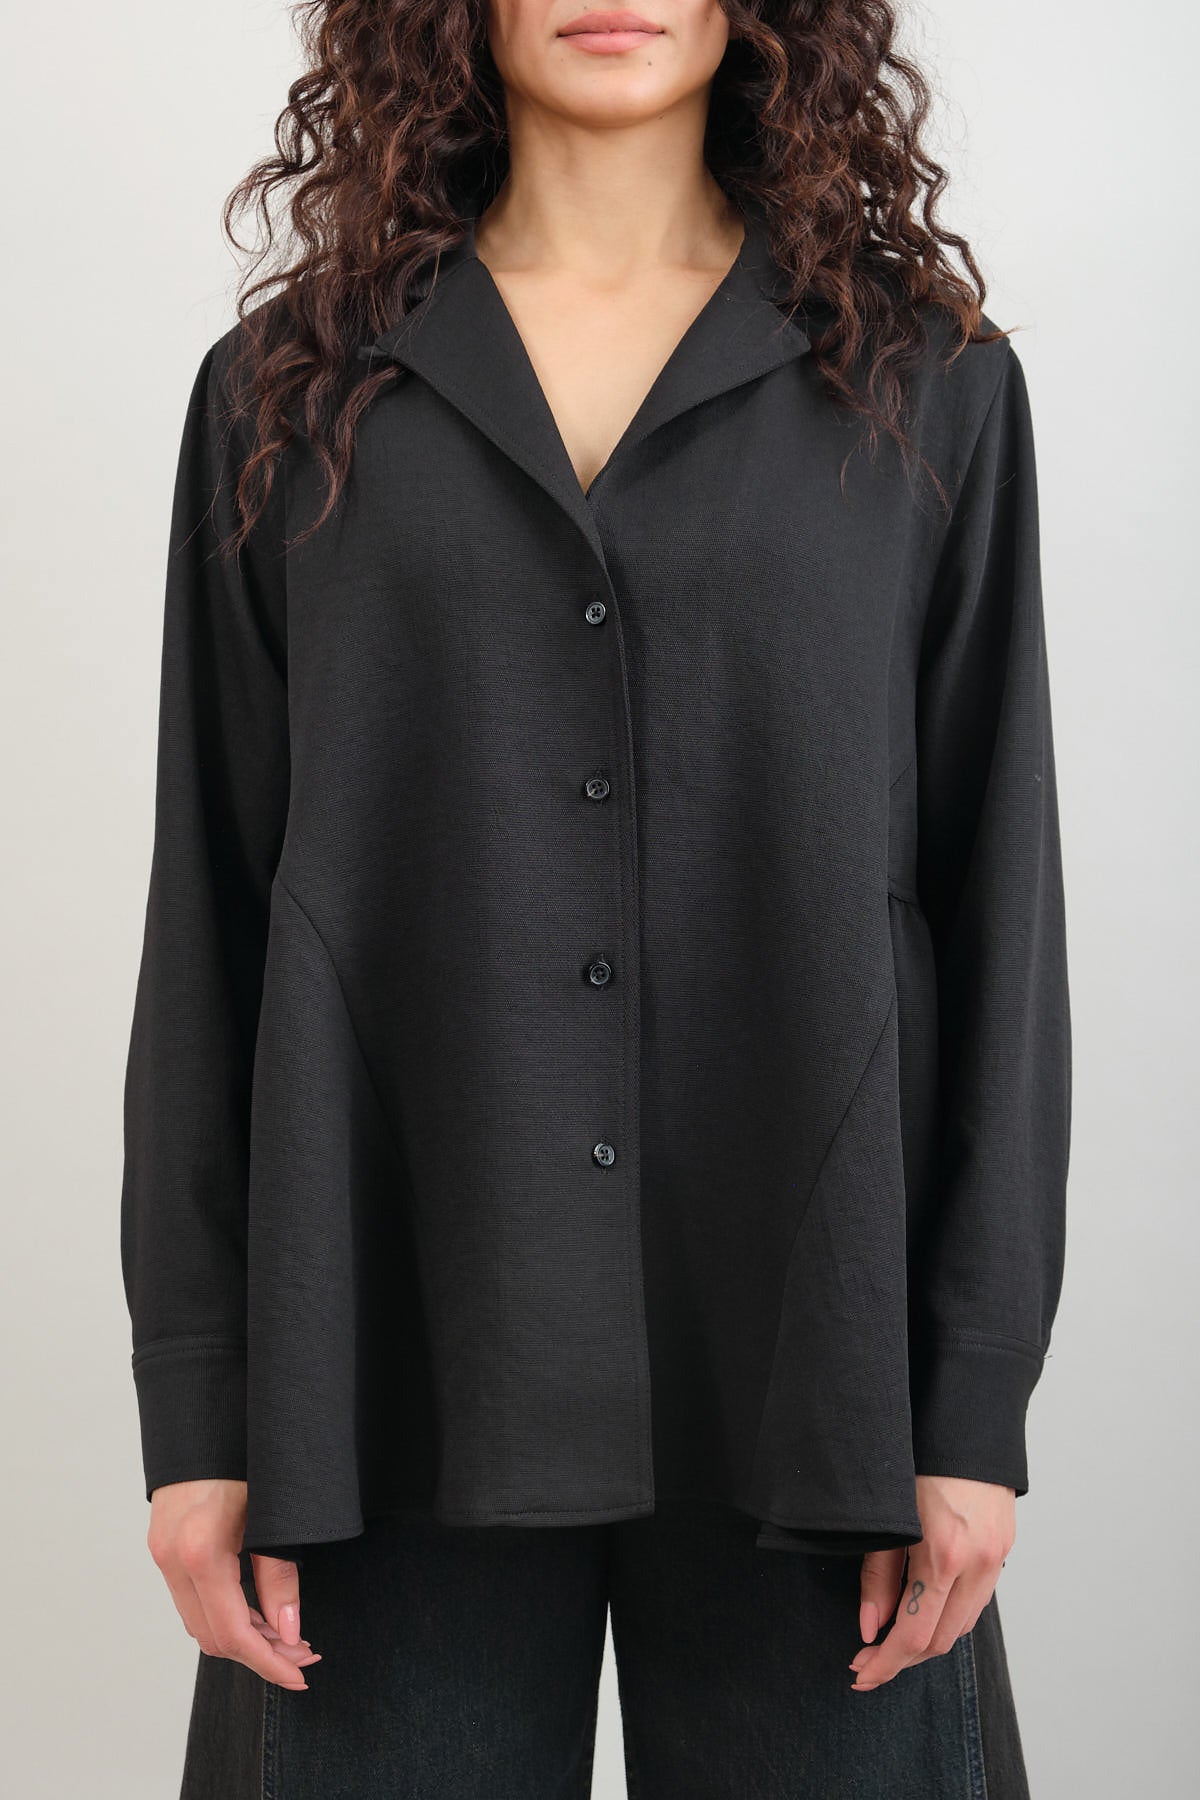 Rachel Comey Samora Top with Buttons down the front